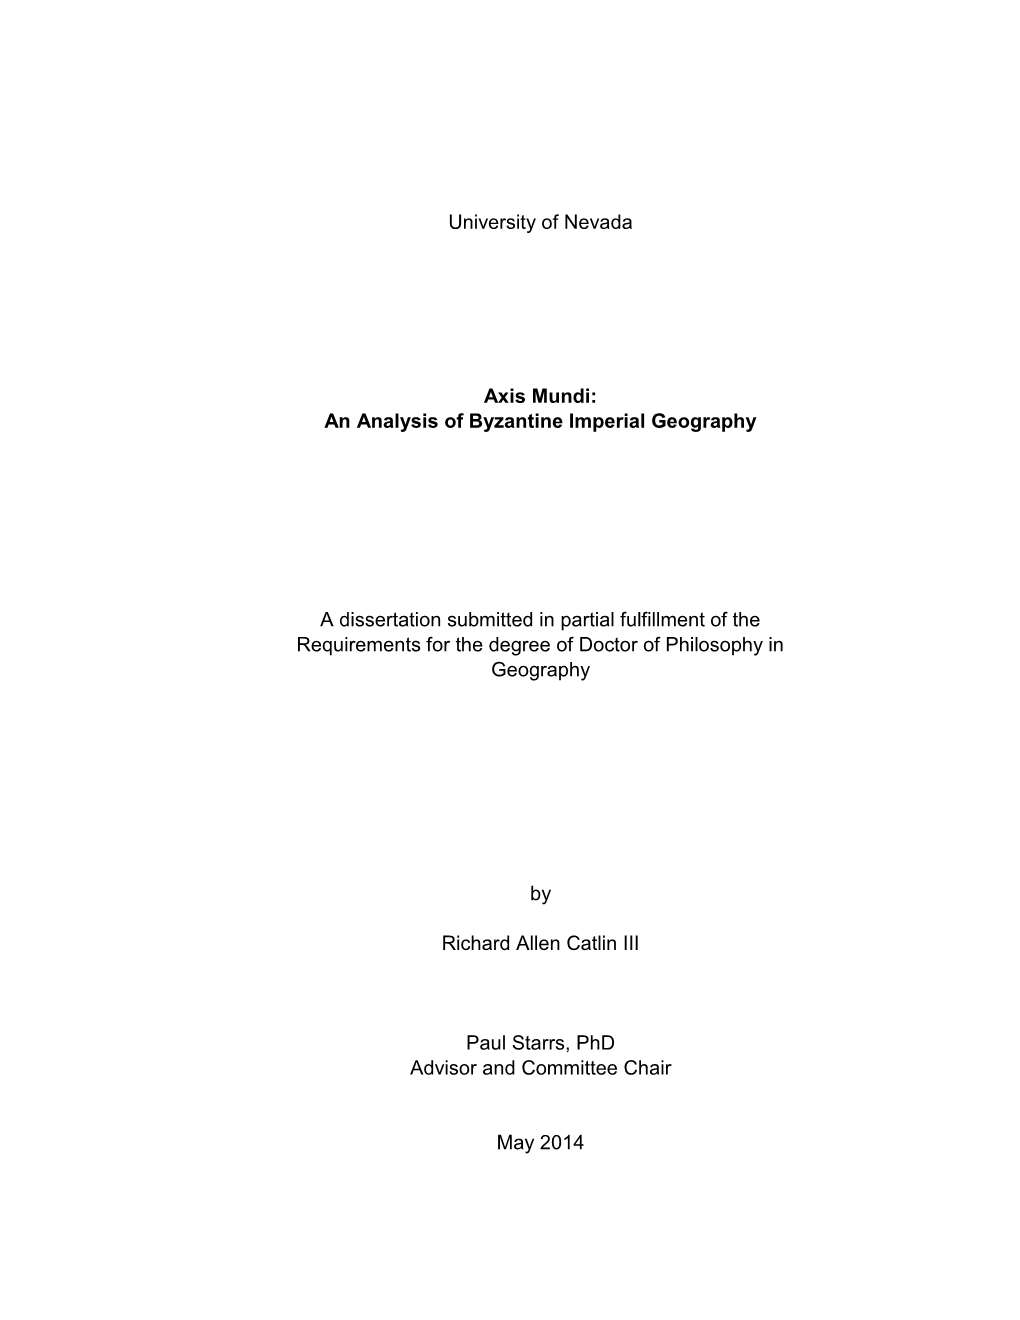 An Analysis of Byzantine Imperial Geography a Dissertation Submitted